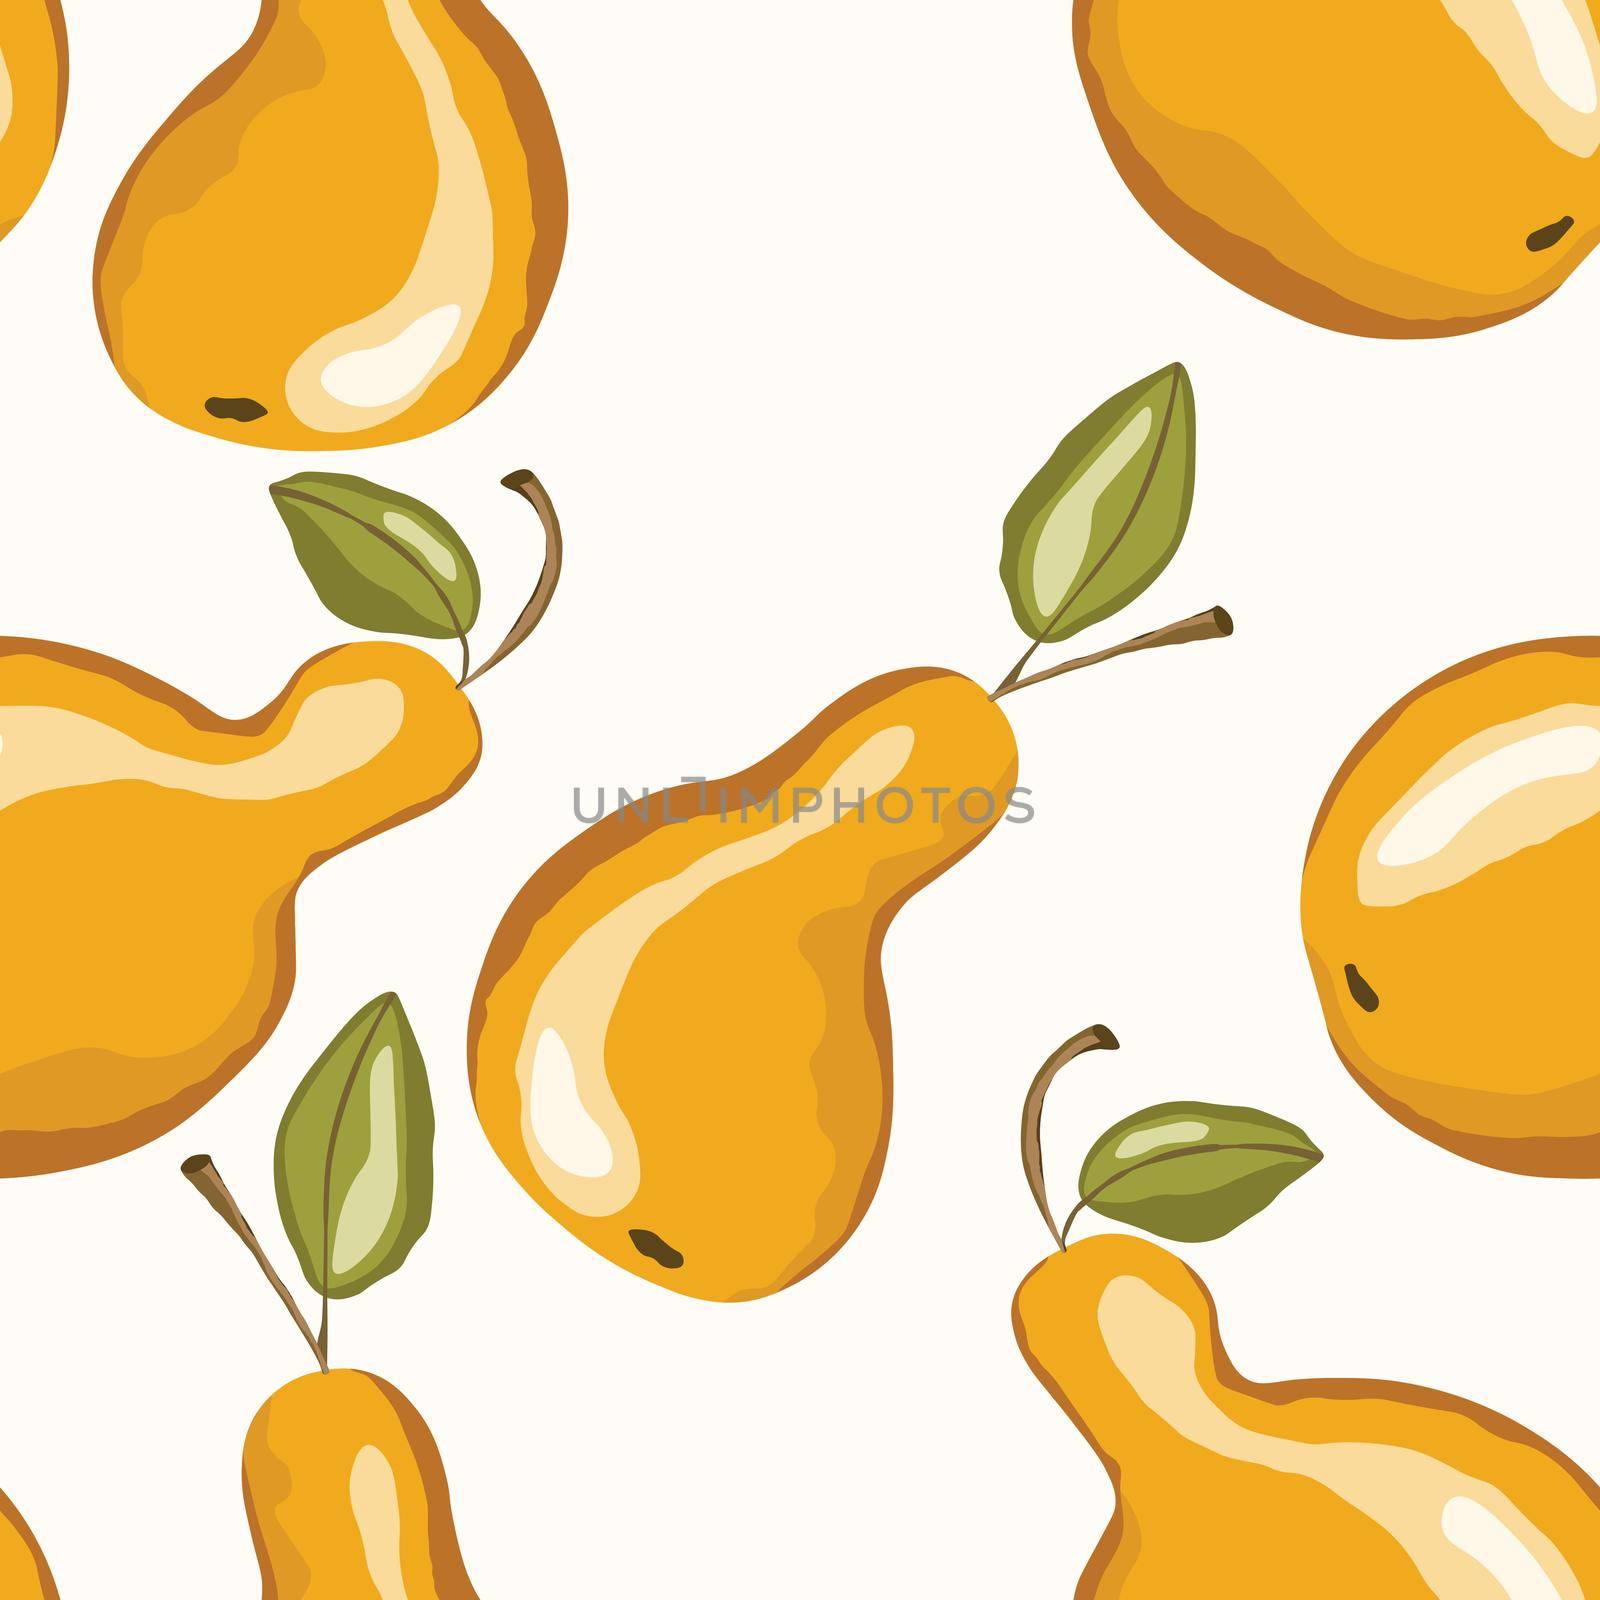 Seamless pattern with pear on white background. Natural delicious fresh ripe tasty fruit. Vector illustration for print, fabric, textile, banner, other design. Stylized pears with leaves.Food concept